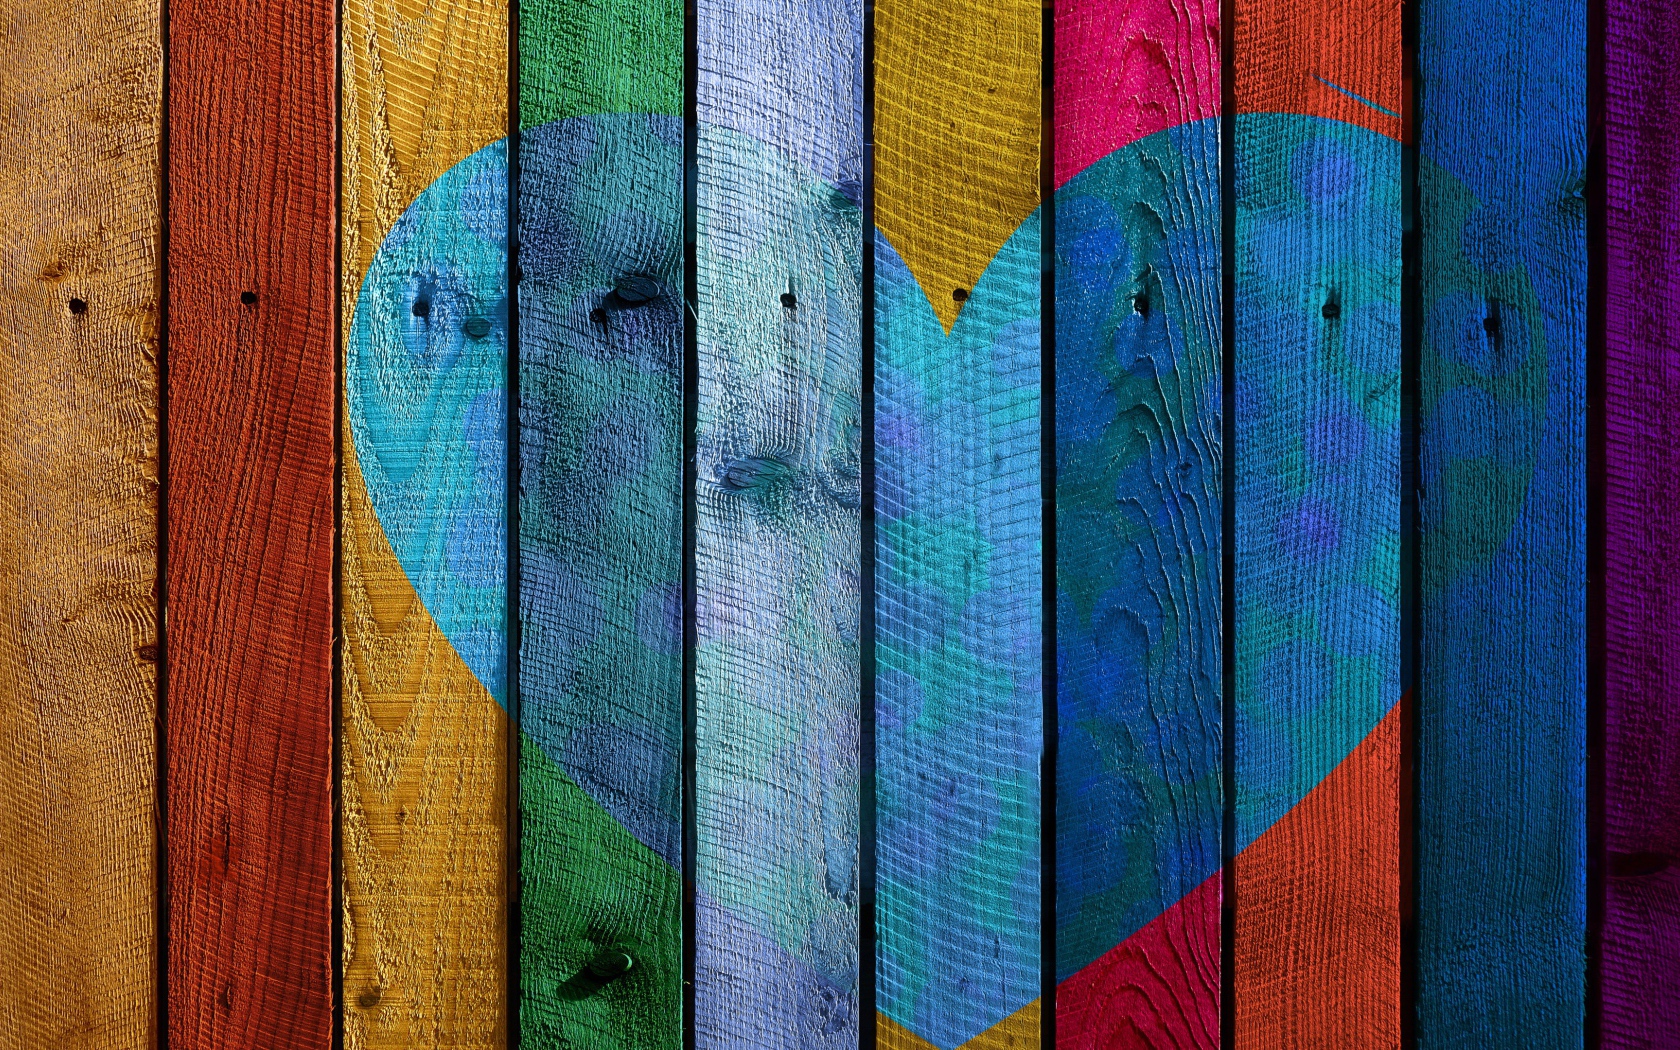 Blue heart painted on a colorful fence